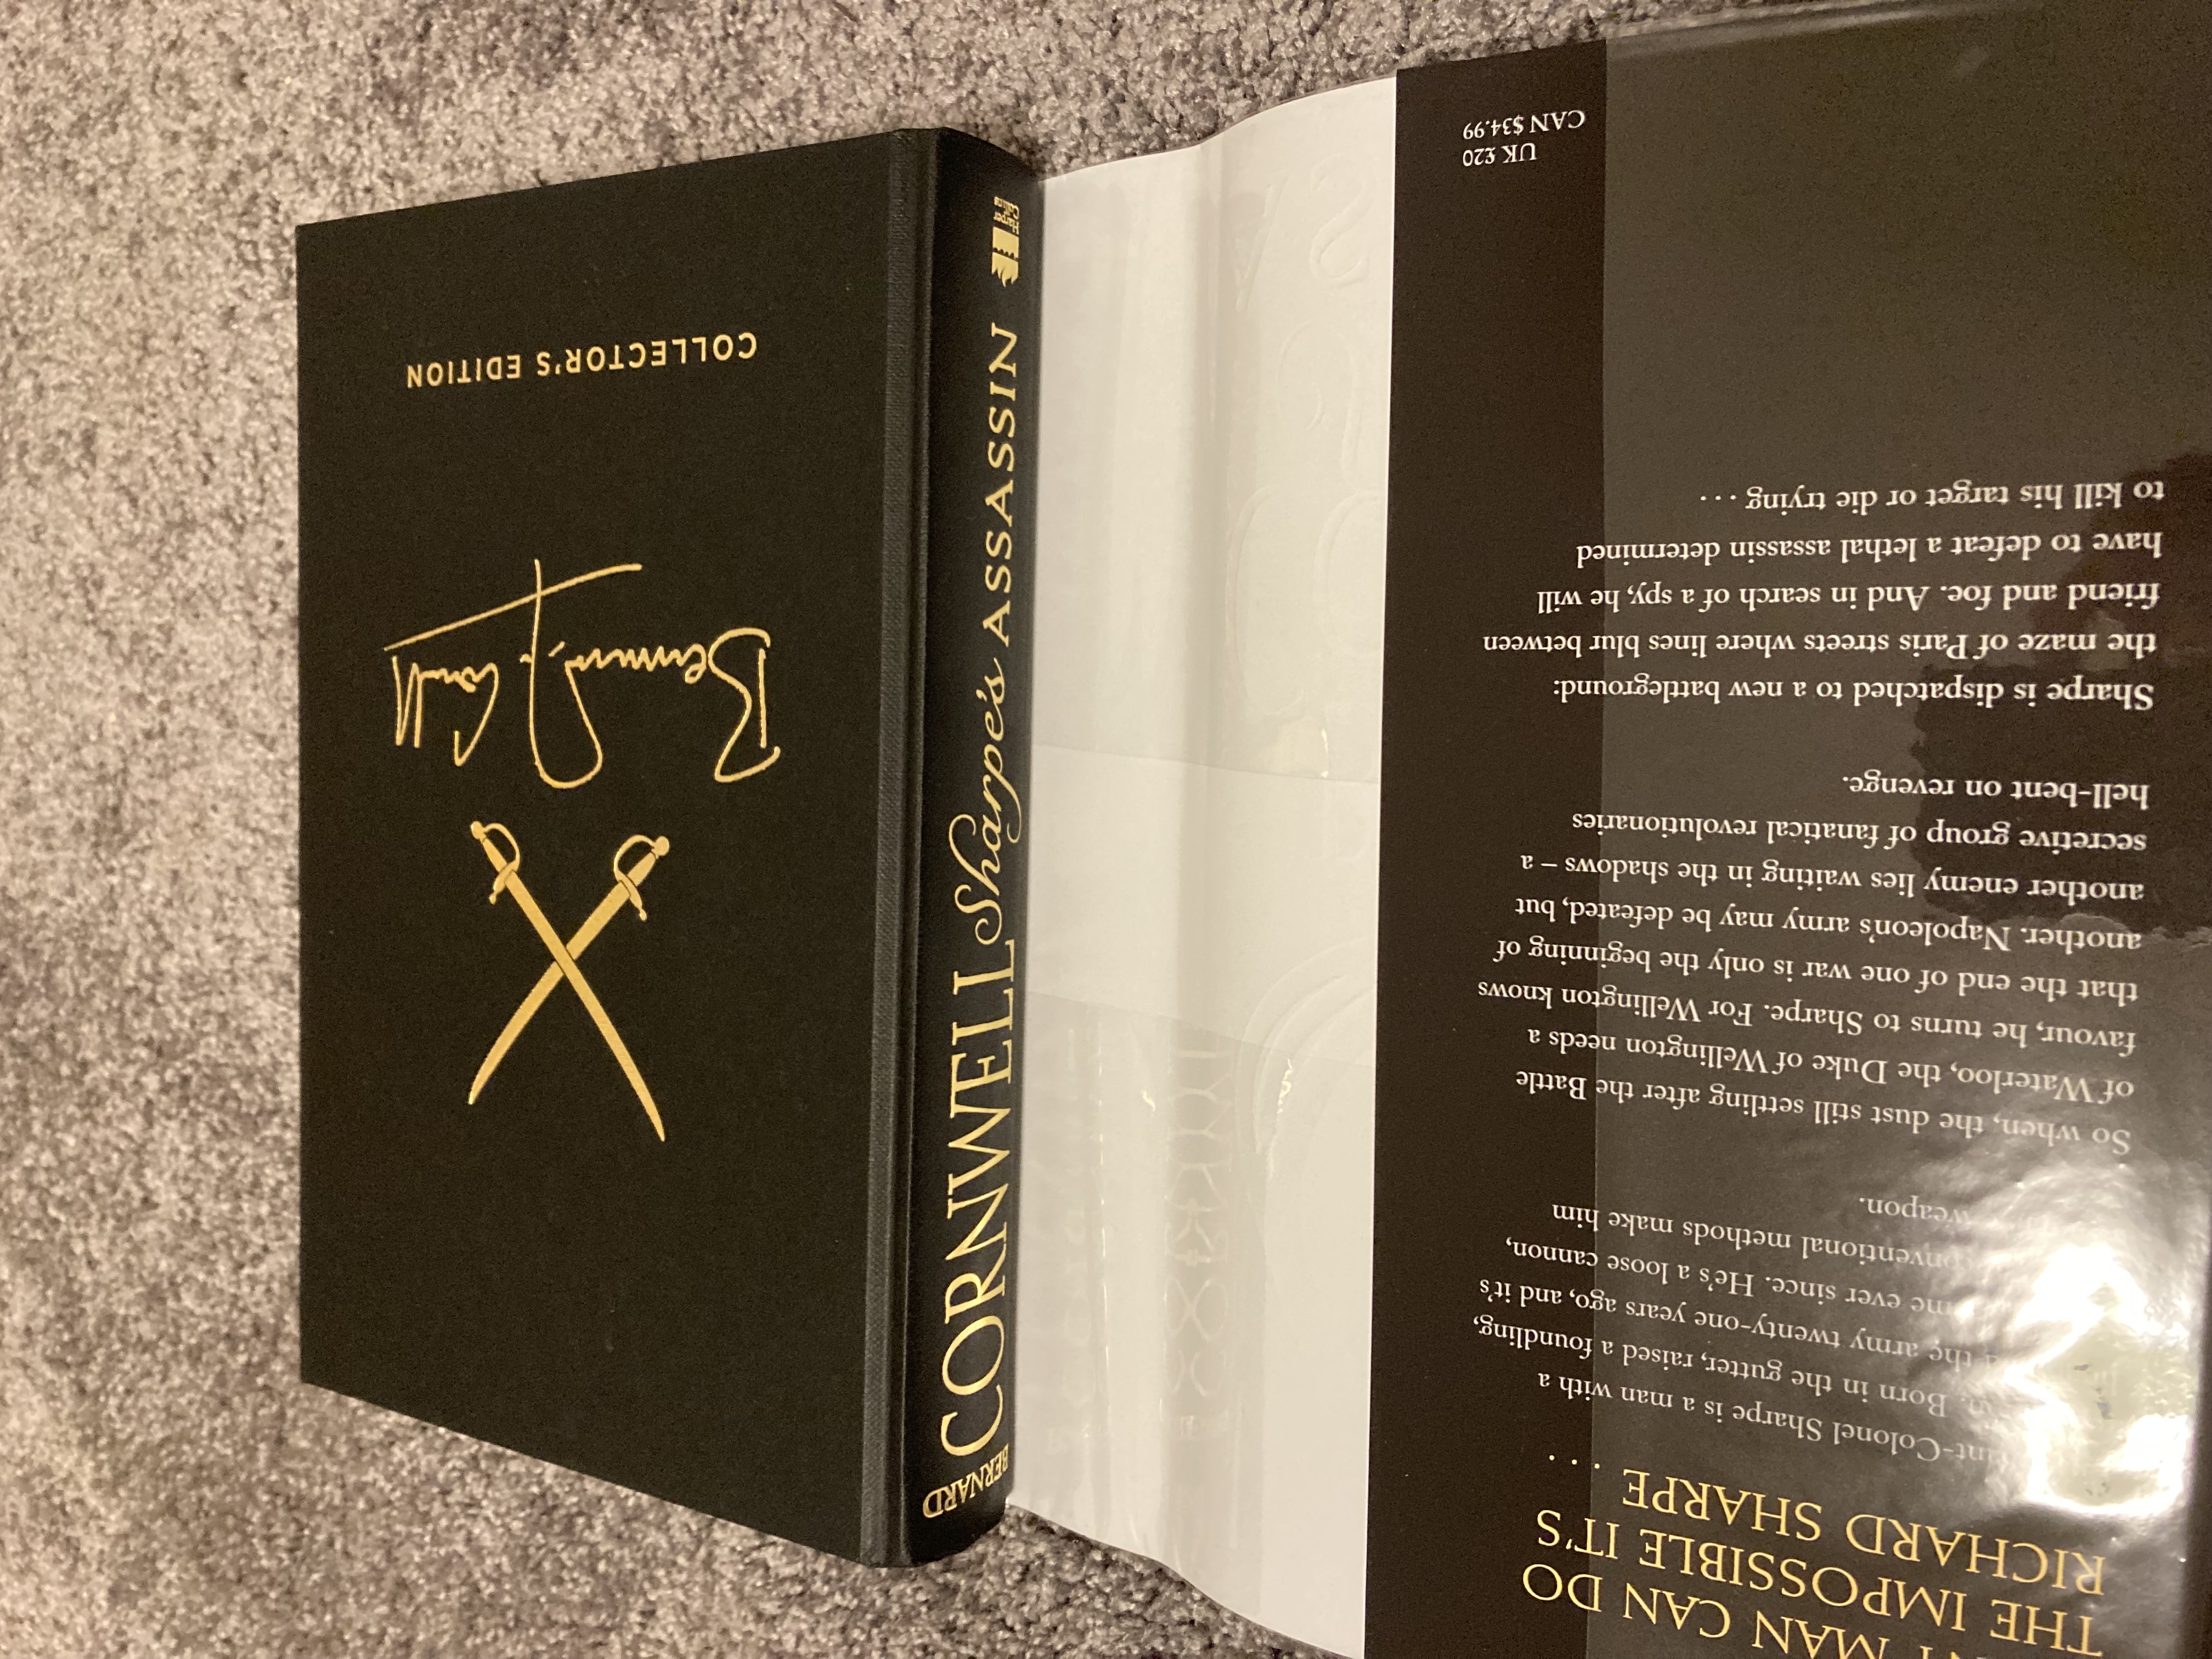 for　Edition,　SHORT　HARDCOVER　Books　1st　Hardcover　by　UK　Collectors　EXCLUSIVE　EDITION　SIGNED　by　Signed　(2021)　BONUS　STORY　FIRST　WITH　New　Author(s)　Bernard　ASSASSIN:　SHARPE'S　Cornwell: